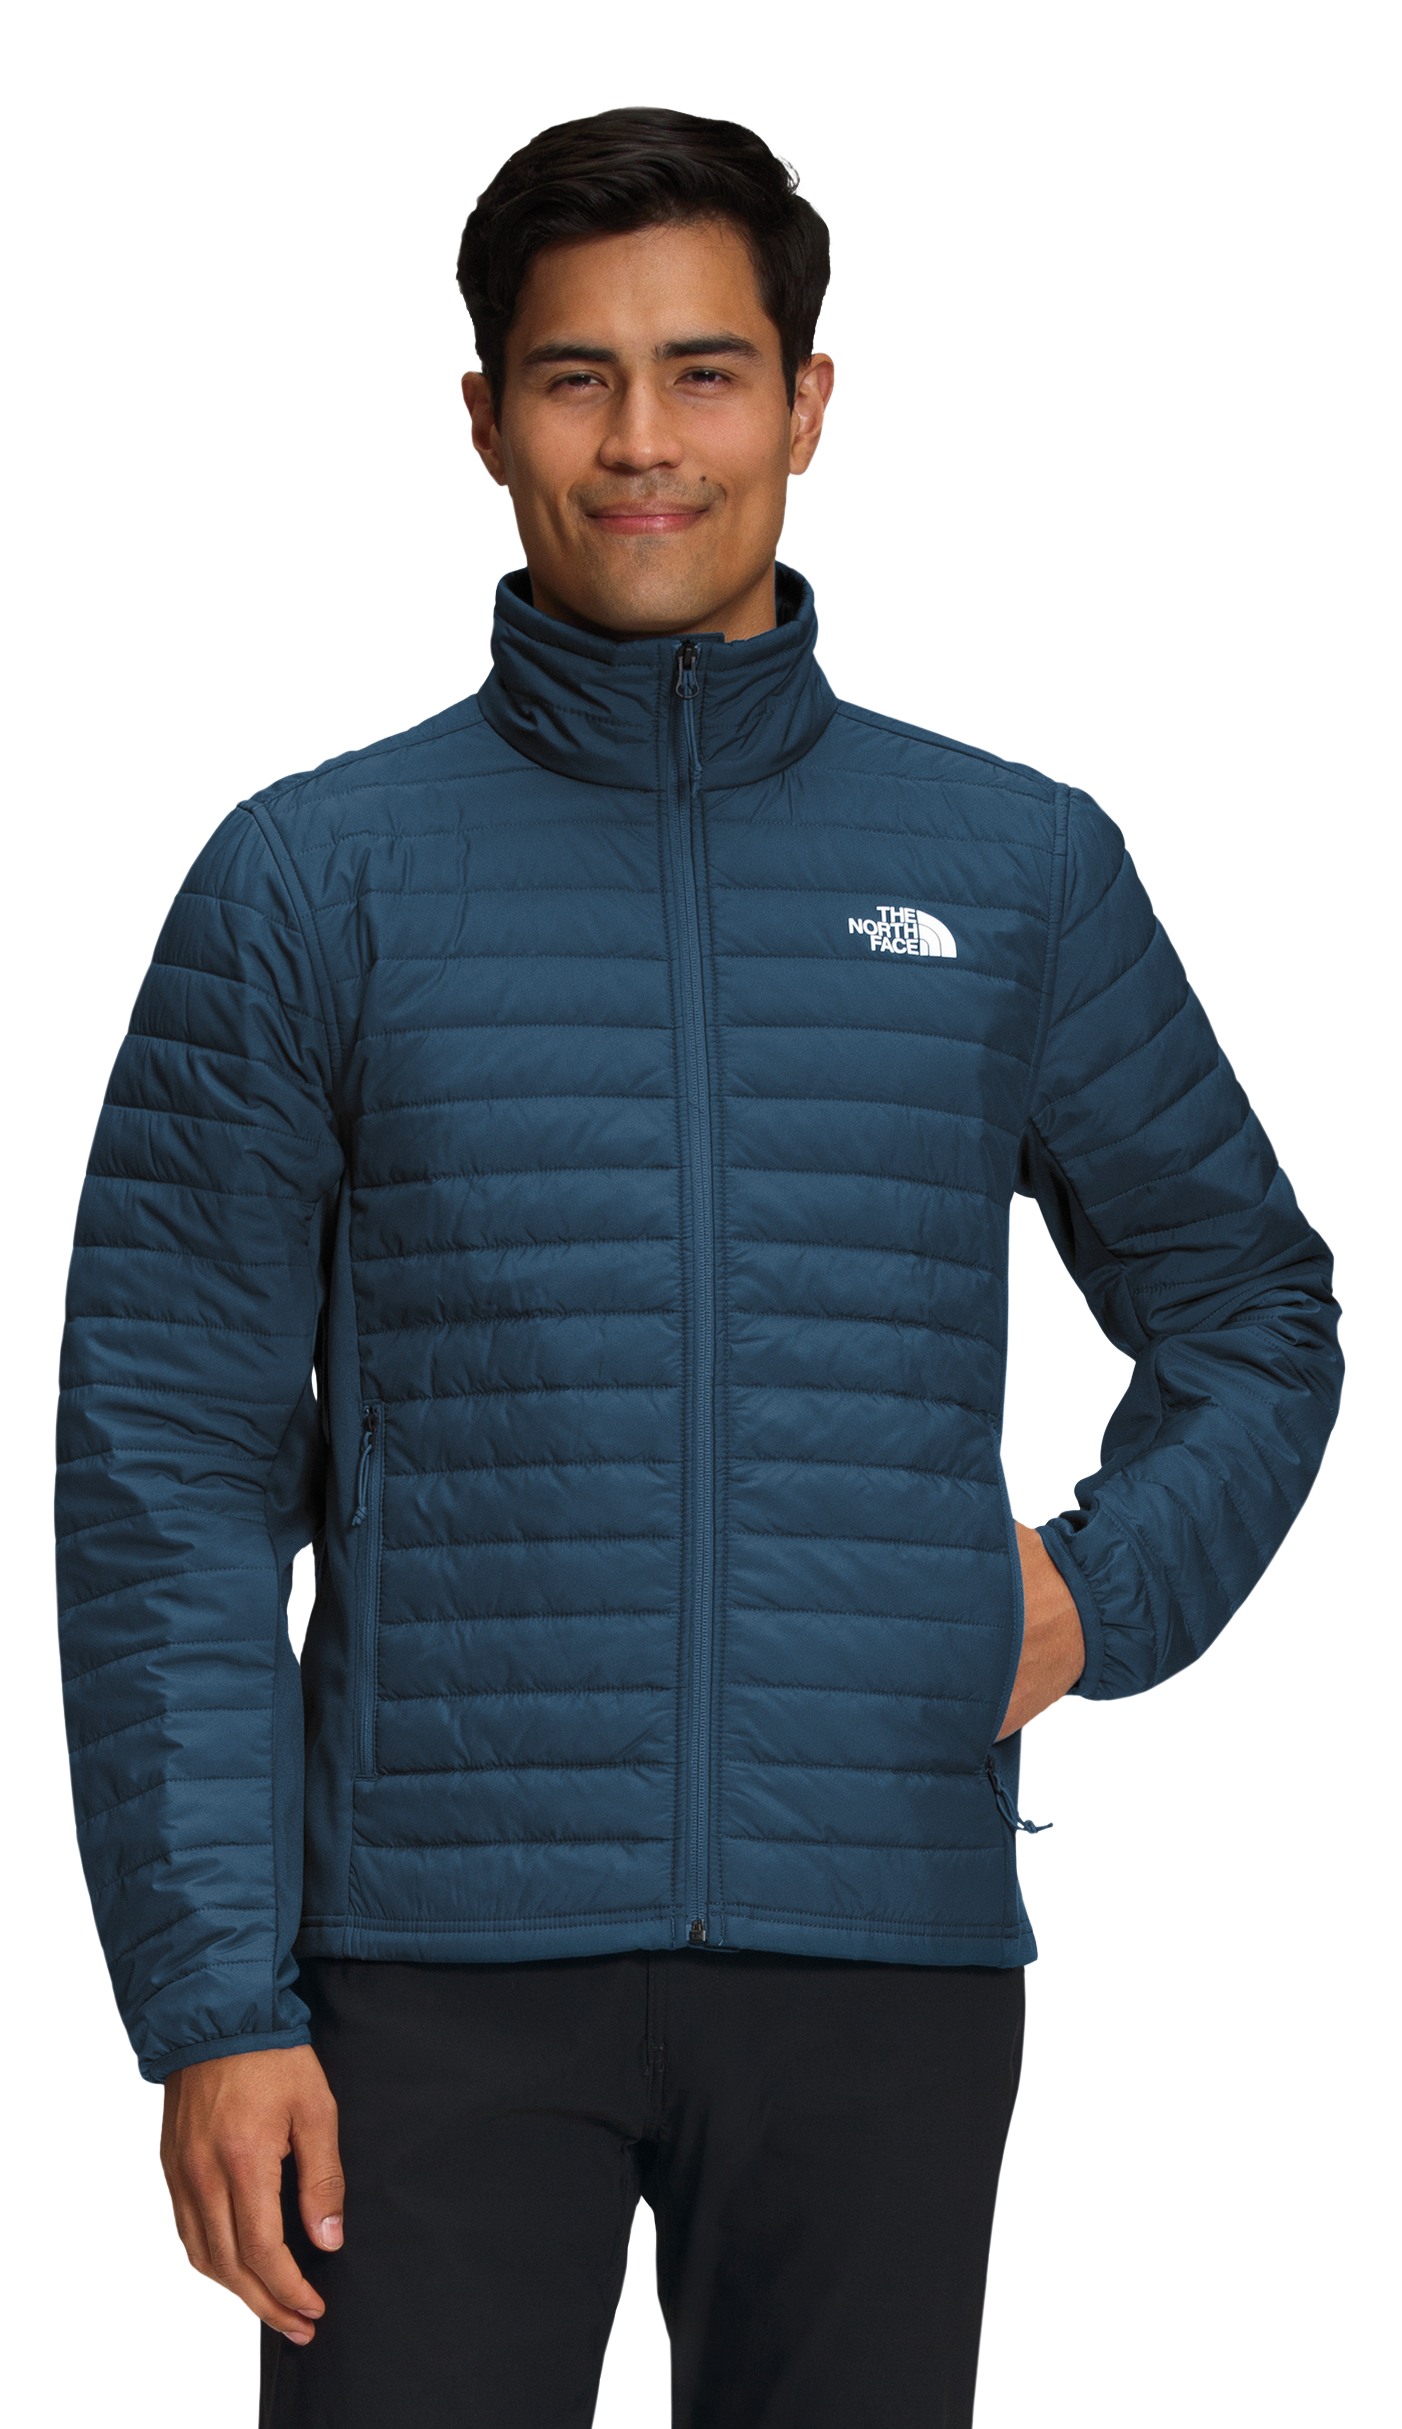 The North Face Canyonlands Hybrid Jacket for Men